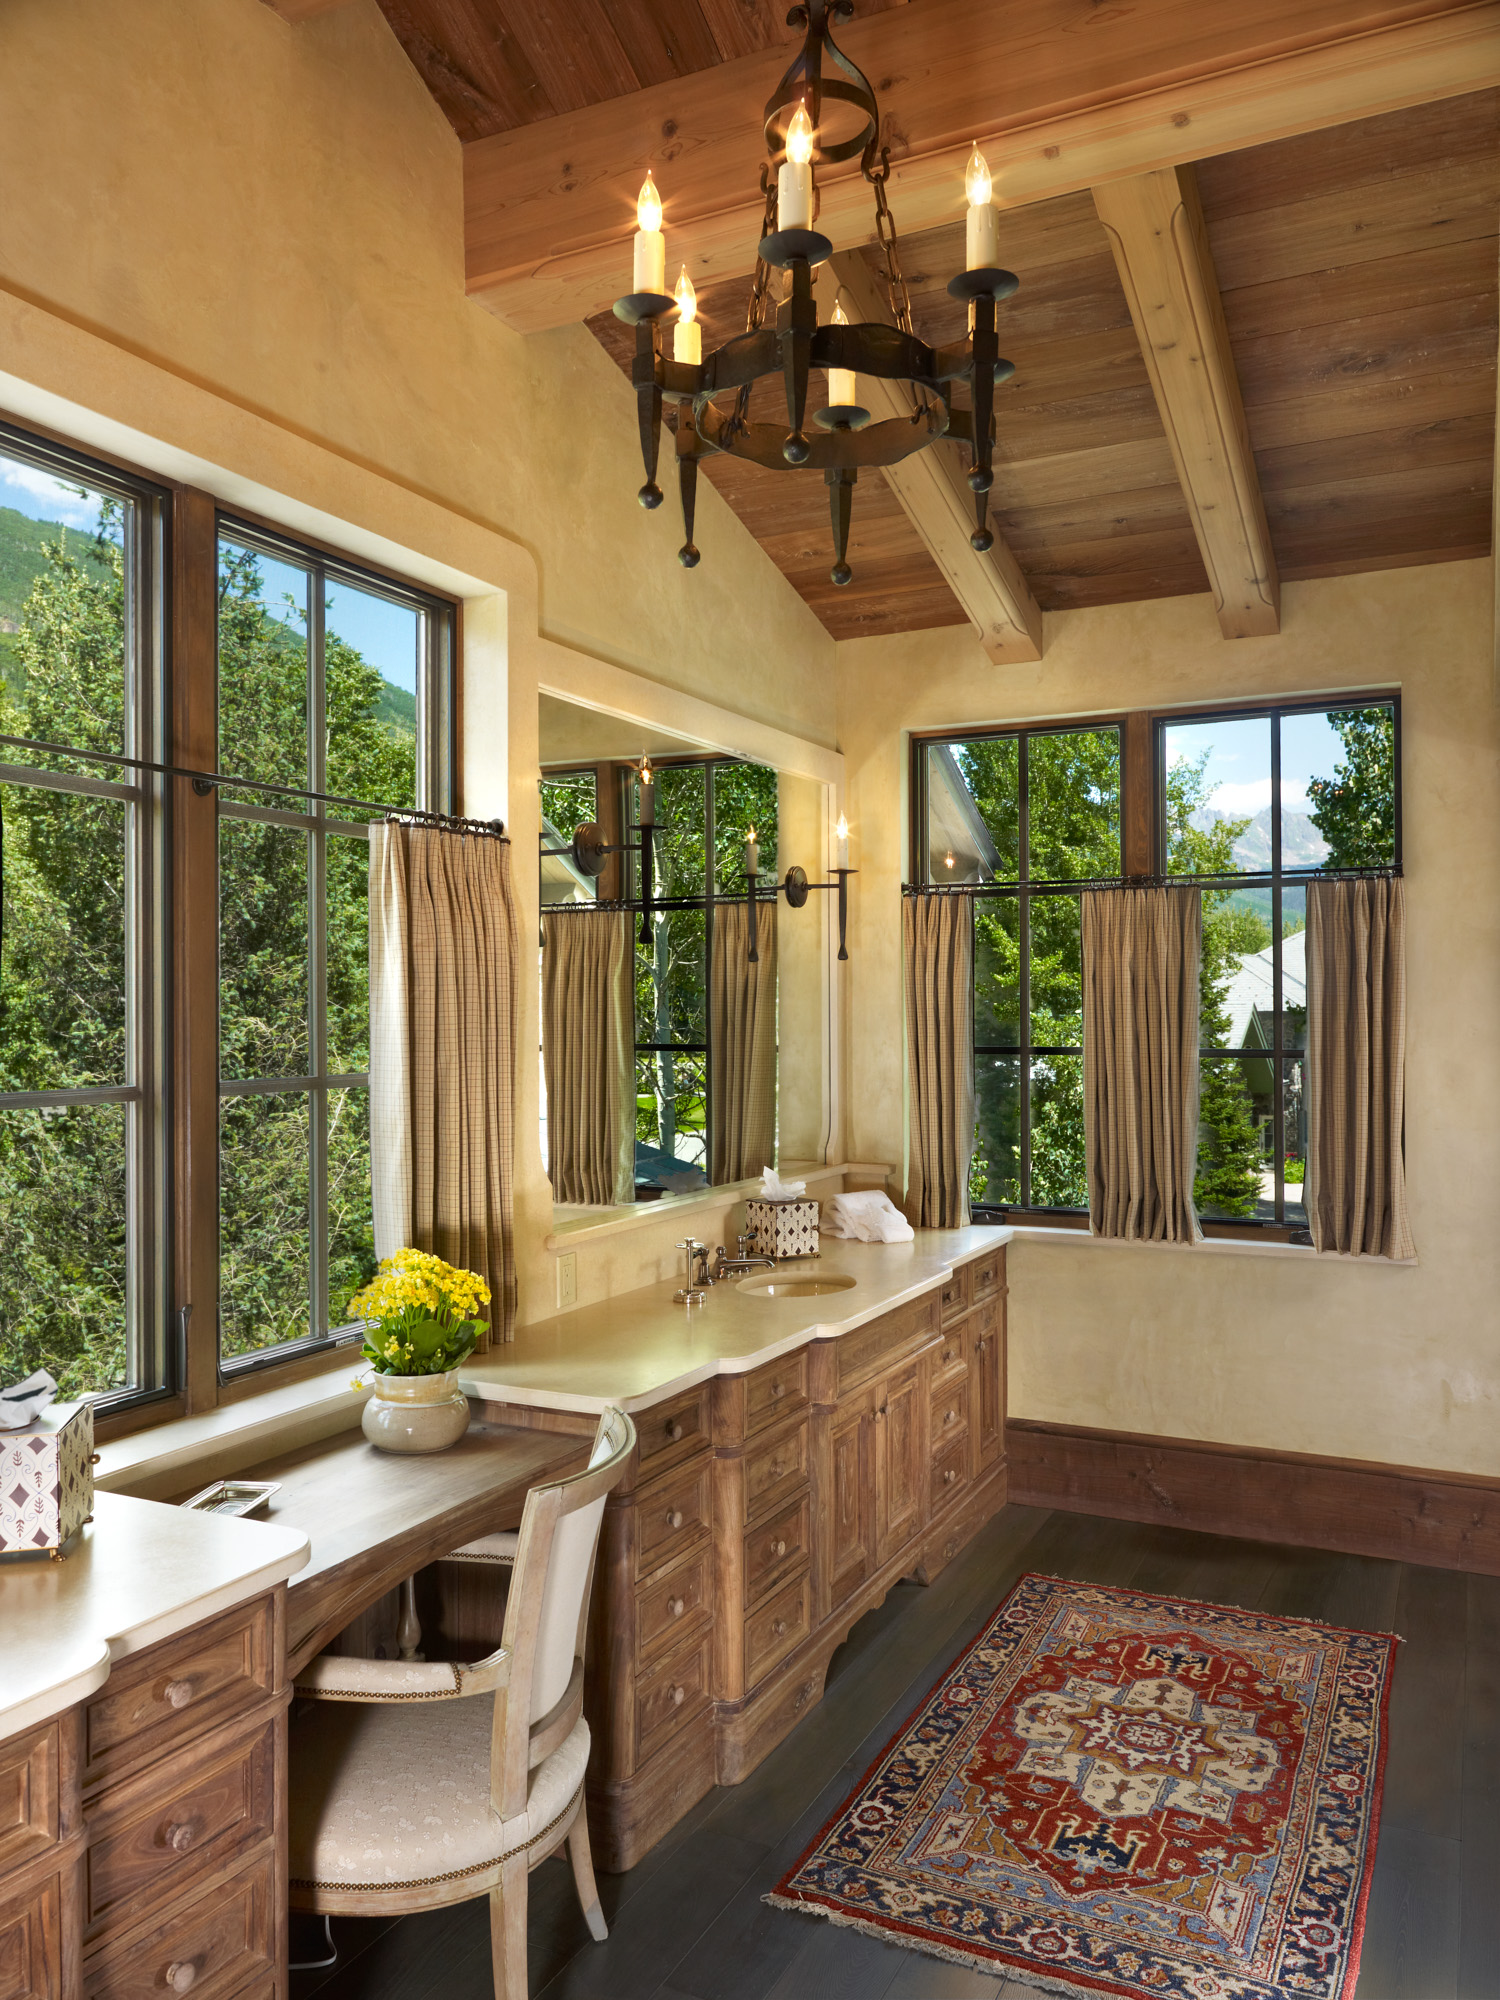 A view of a rustic traditional bathroom at hornsilver